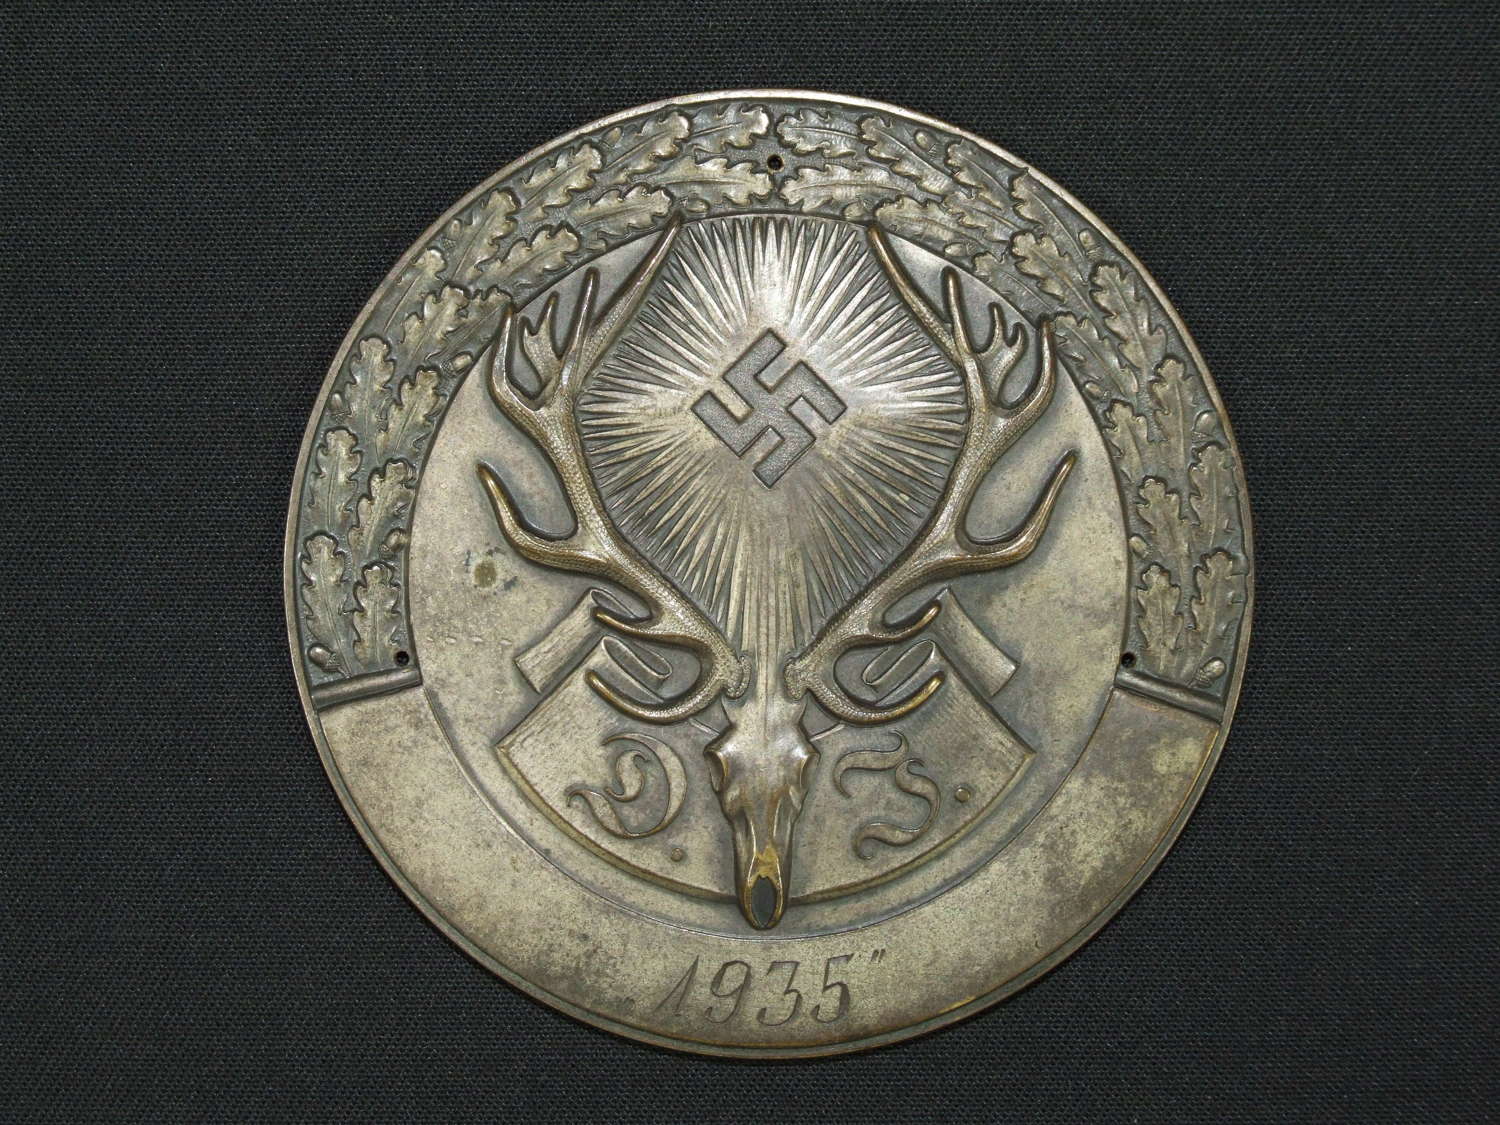 A 1935 German Hunting Association Plaque in Silver.